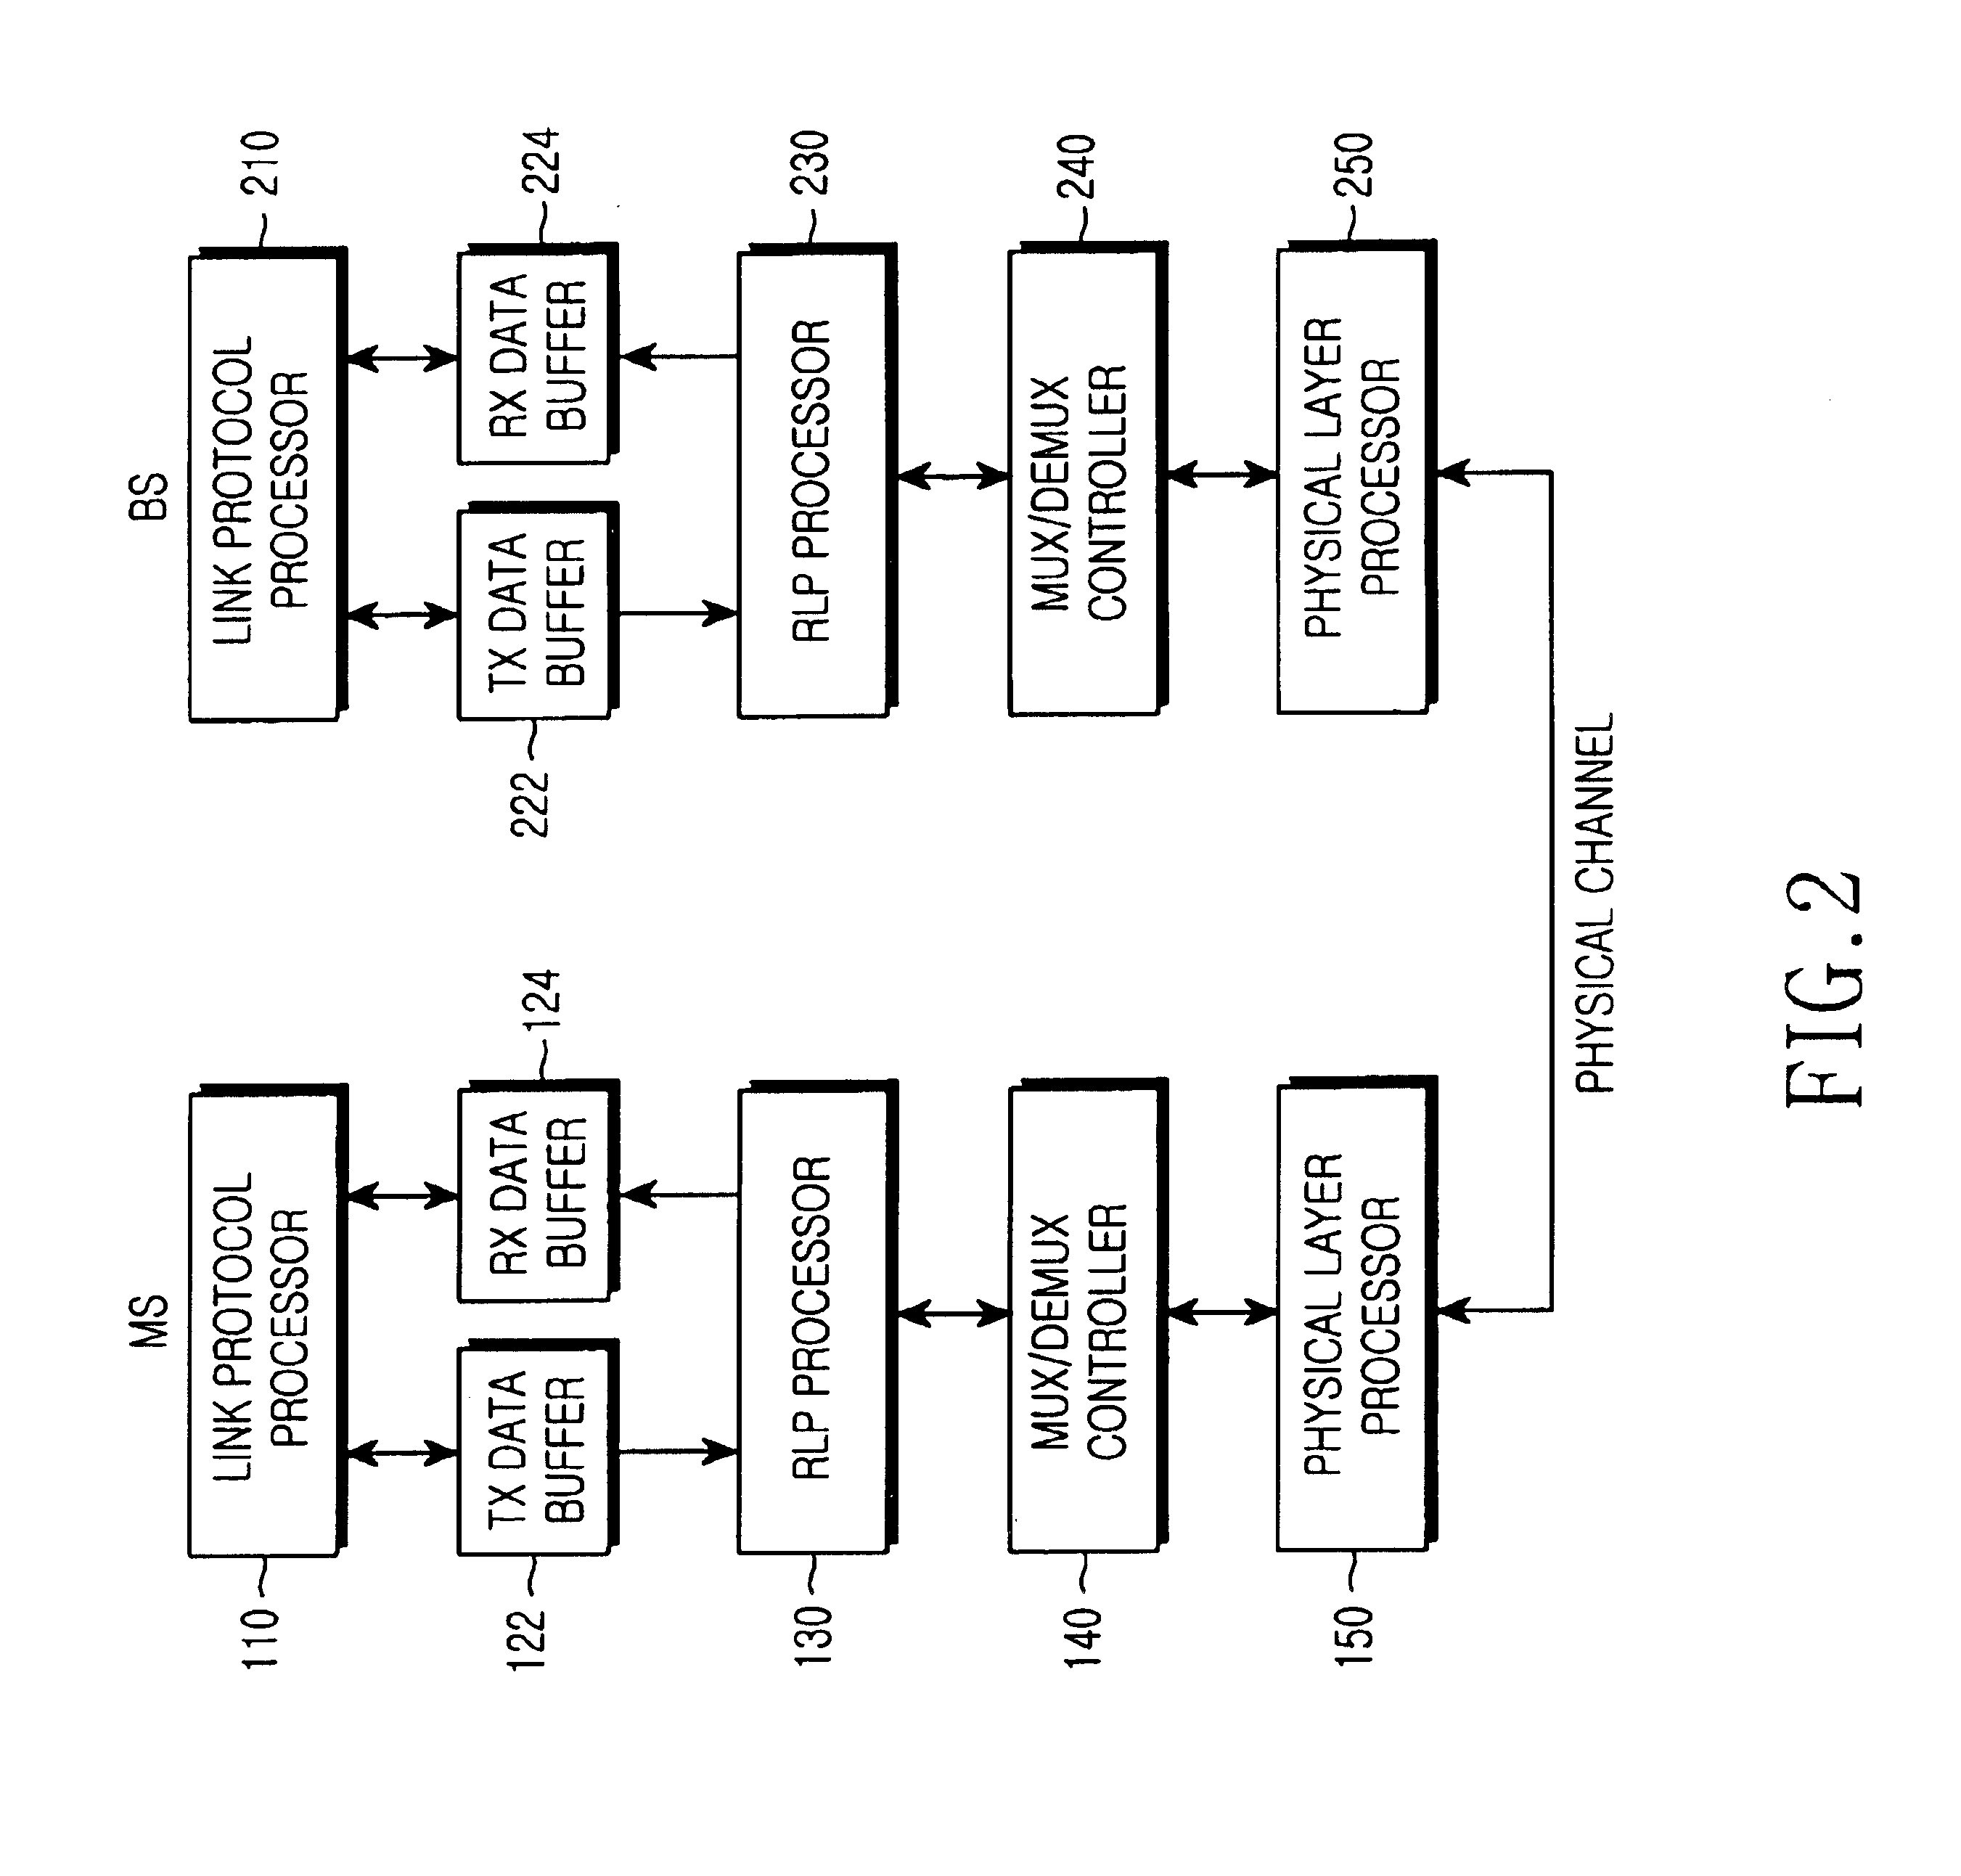 Apparatus and method for exchanging variable-length data according to a radio link protocol in a mobile communication system